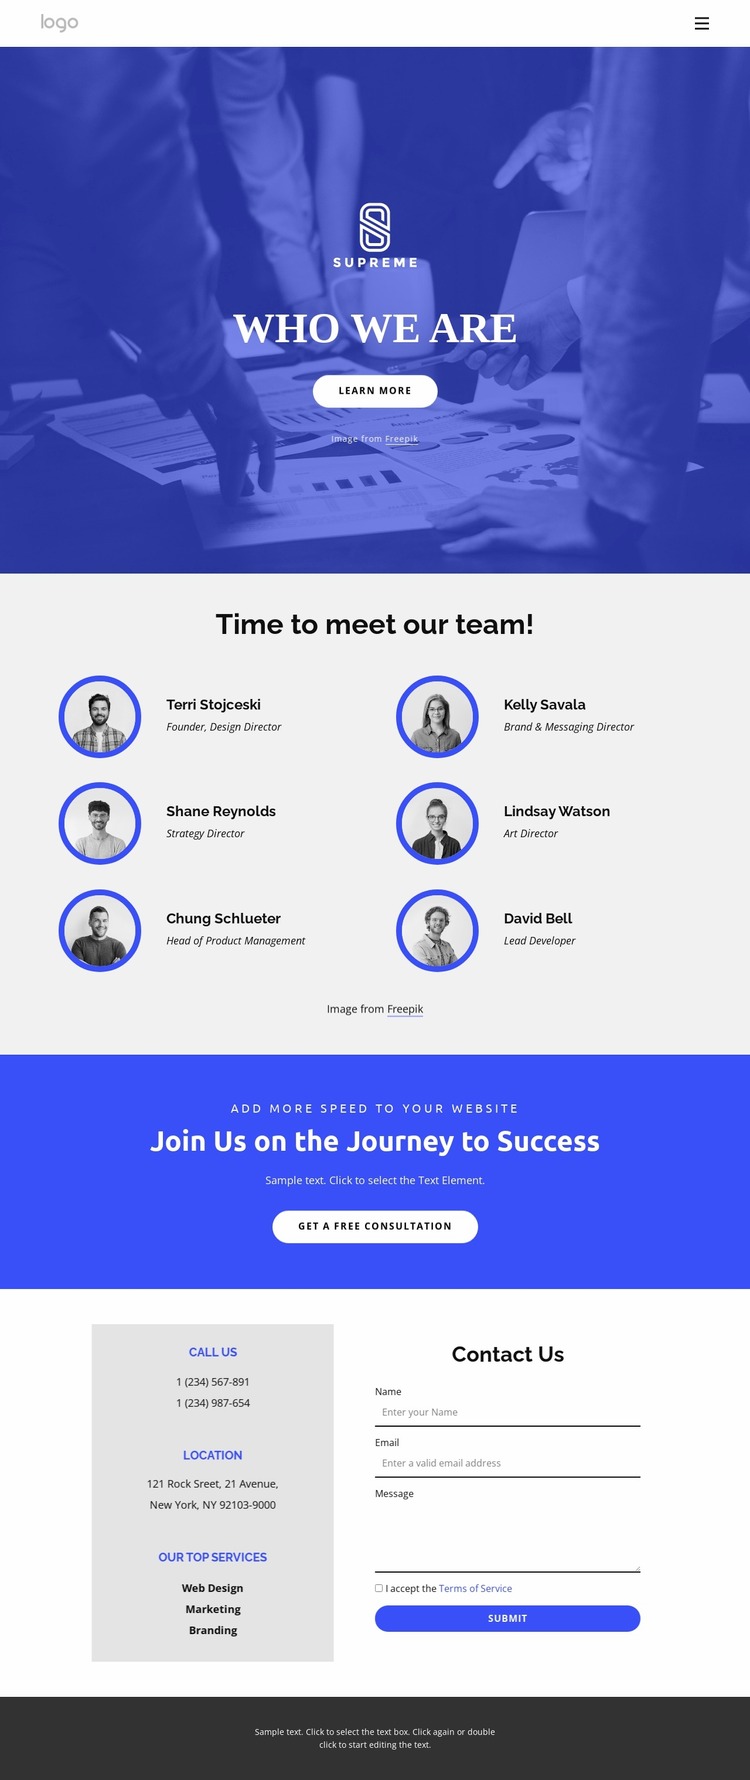 Time to meet our amazing team Website Mockup